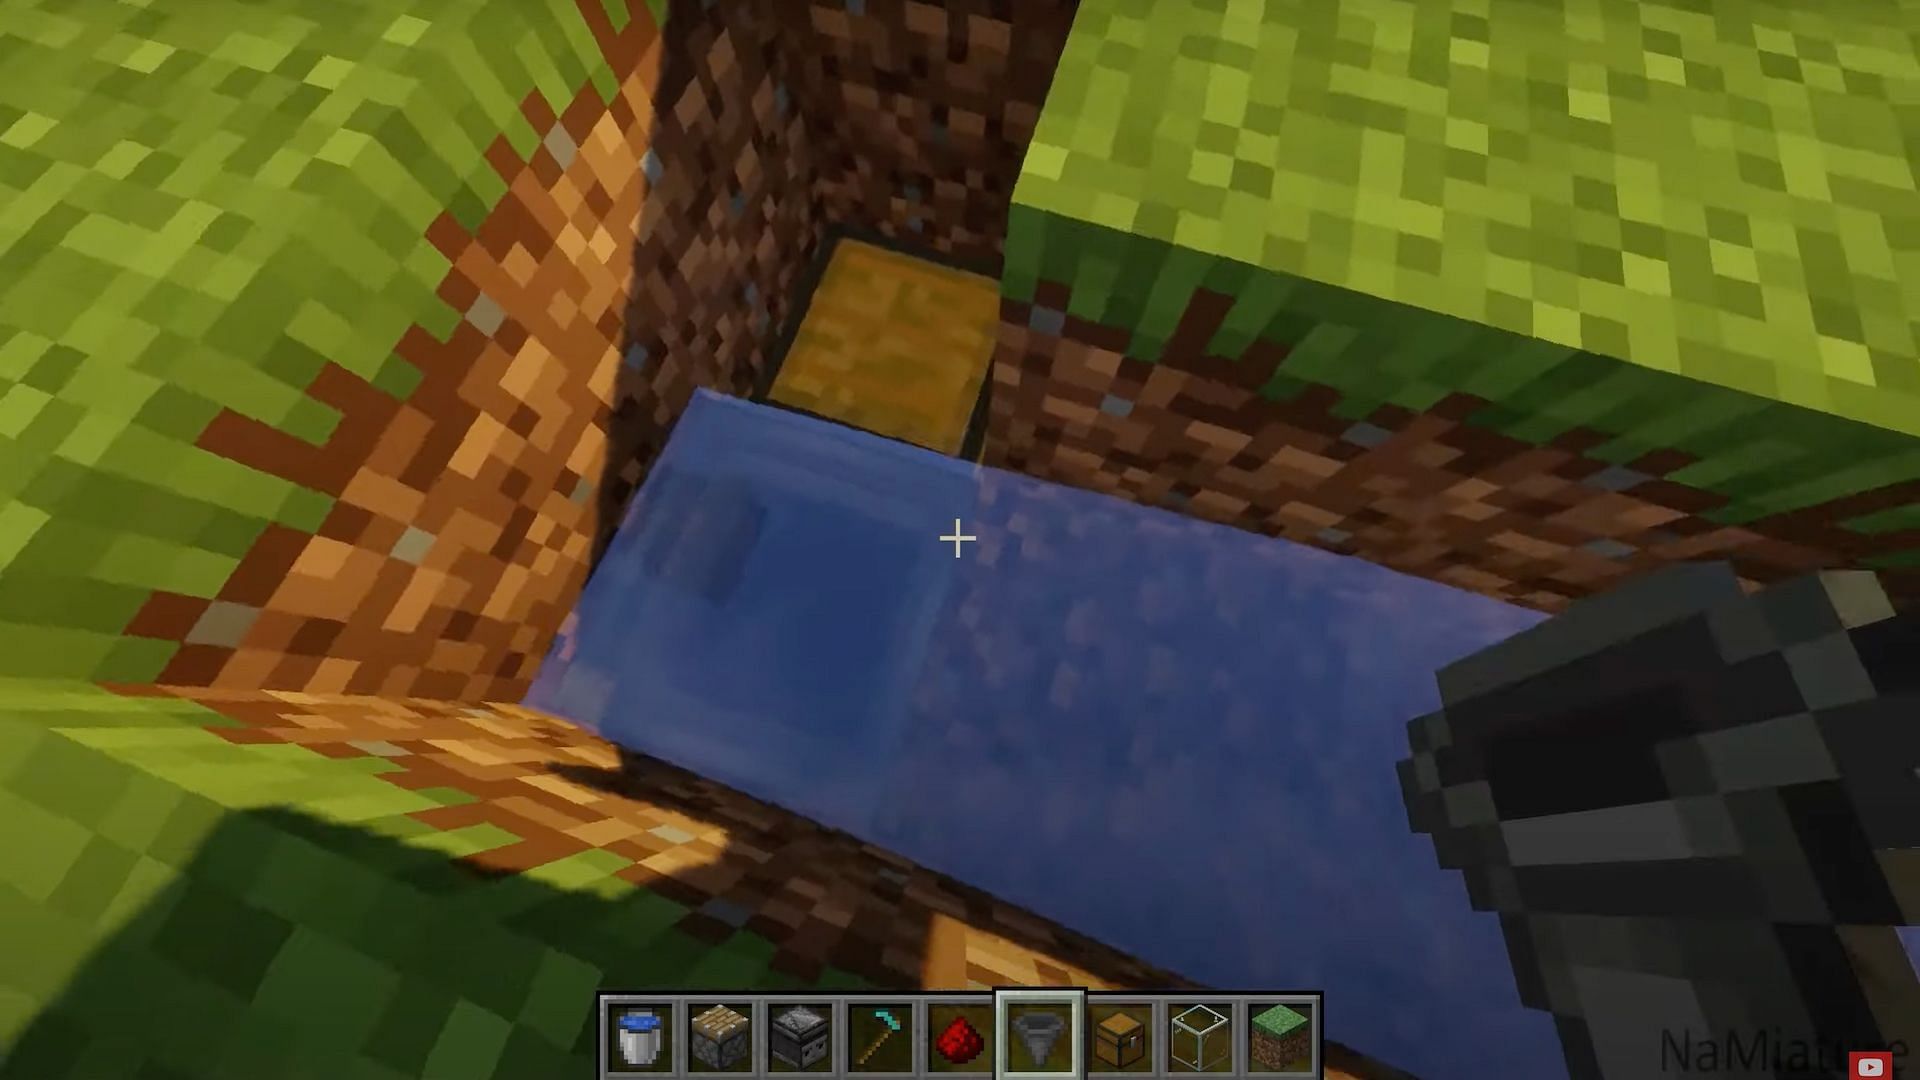 Fill the hole with the hopper and chest to gather materials (Image via NaMiature/YouTube)